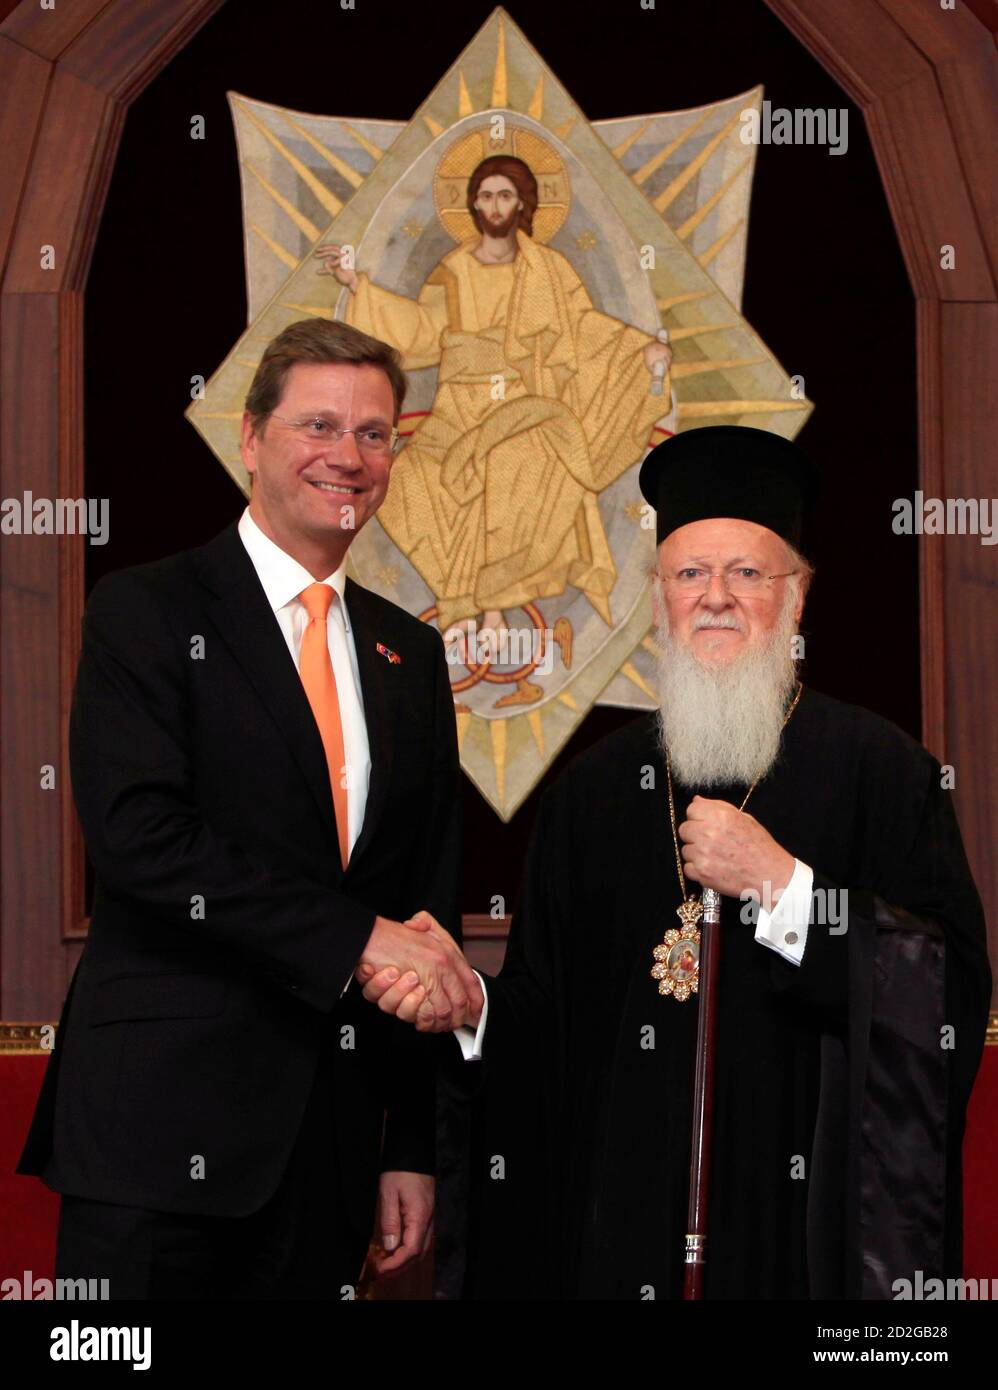 Germany's Foreign Minister Guido Westerwelle (L), leader of Germany's liberal party, the Free Democratic Party (FDP), shakes hands with Ecumenical Orthodox Patriarch Bartholomew I at the Greek Orthodox Patriarchate in Istanbul January 8, 2010. REUTERS/Murad Sezer (TURKEY - Tags: POLITICS RELIGION SOCIETY) Stock Photo